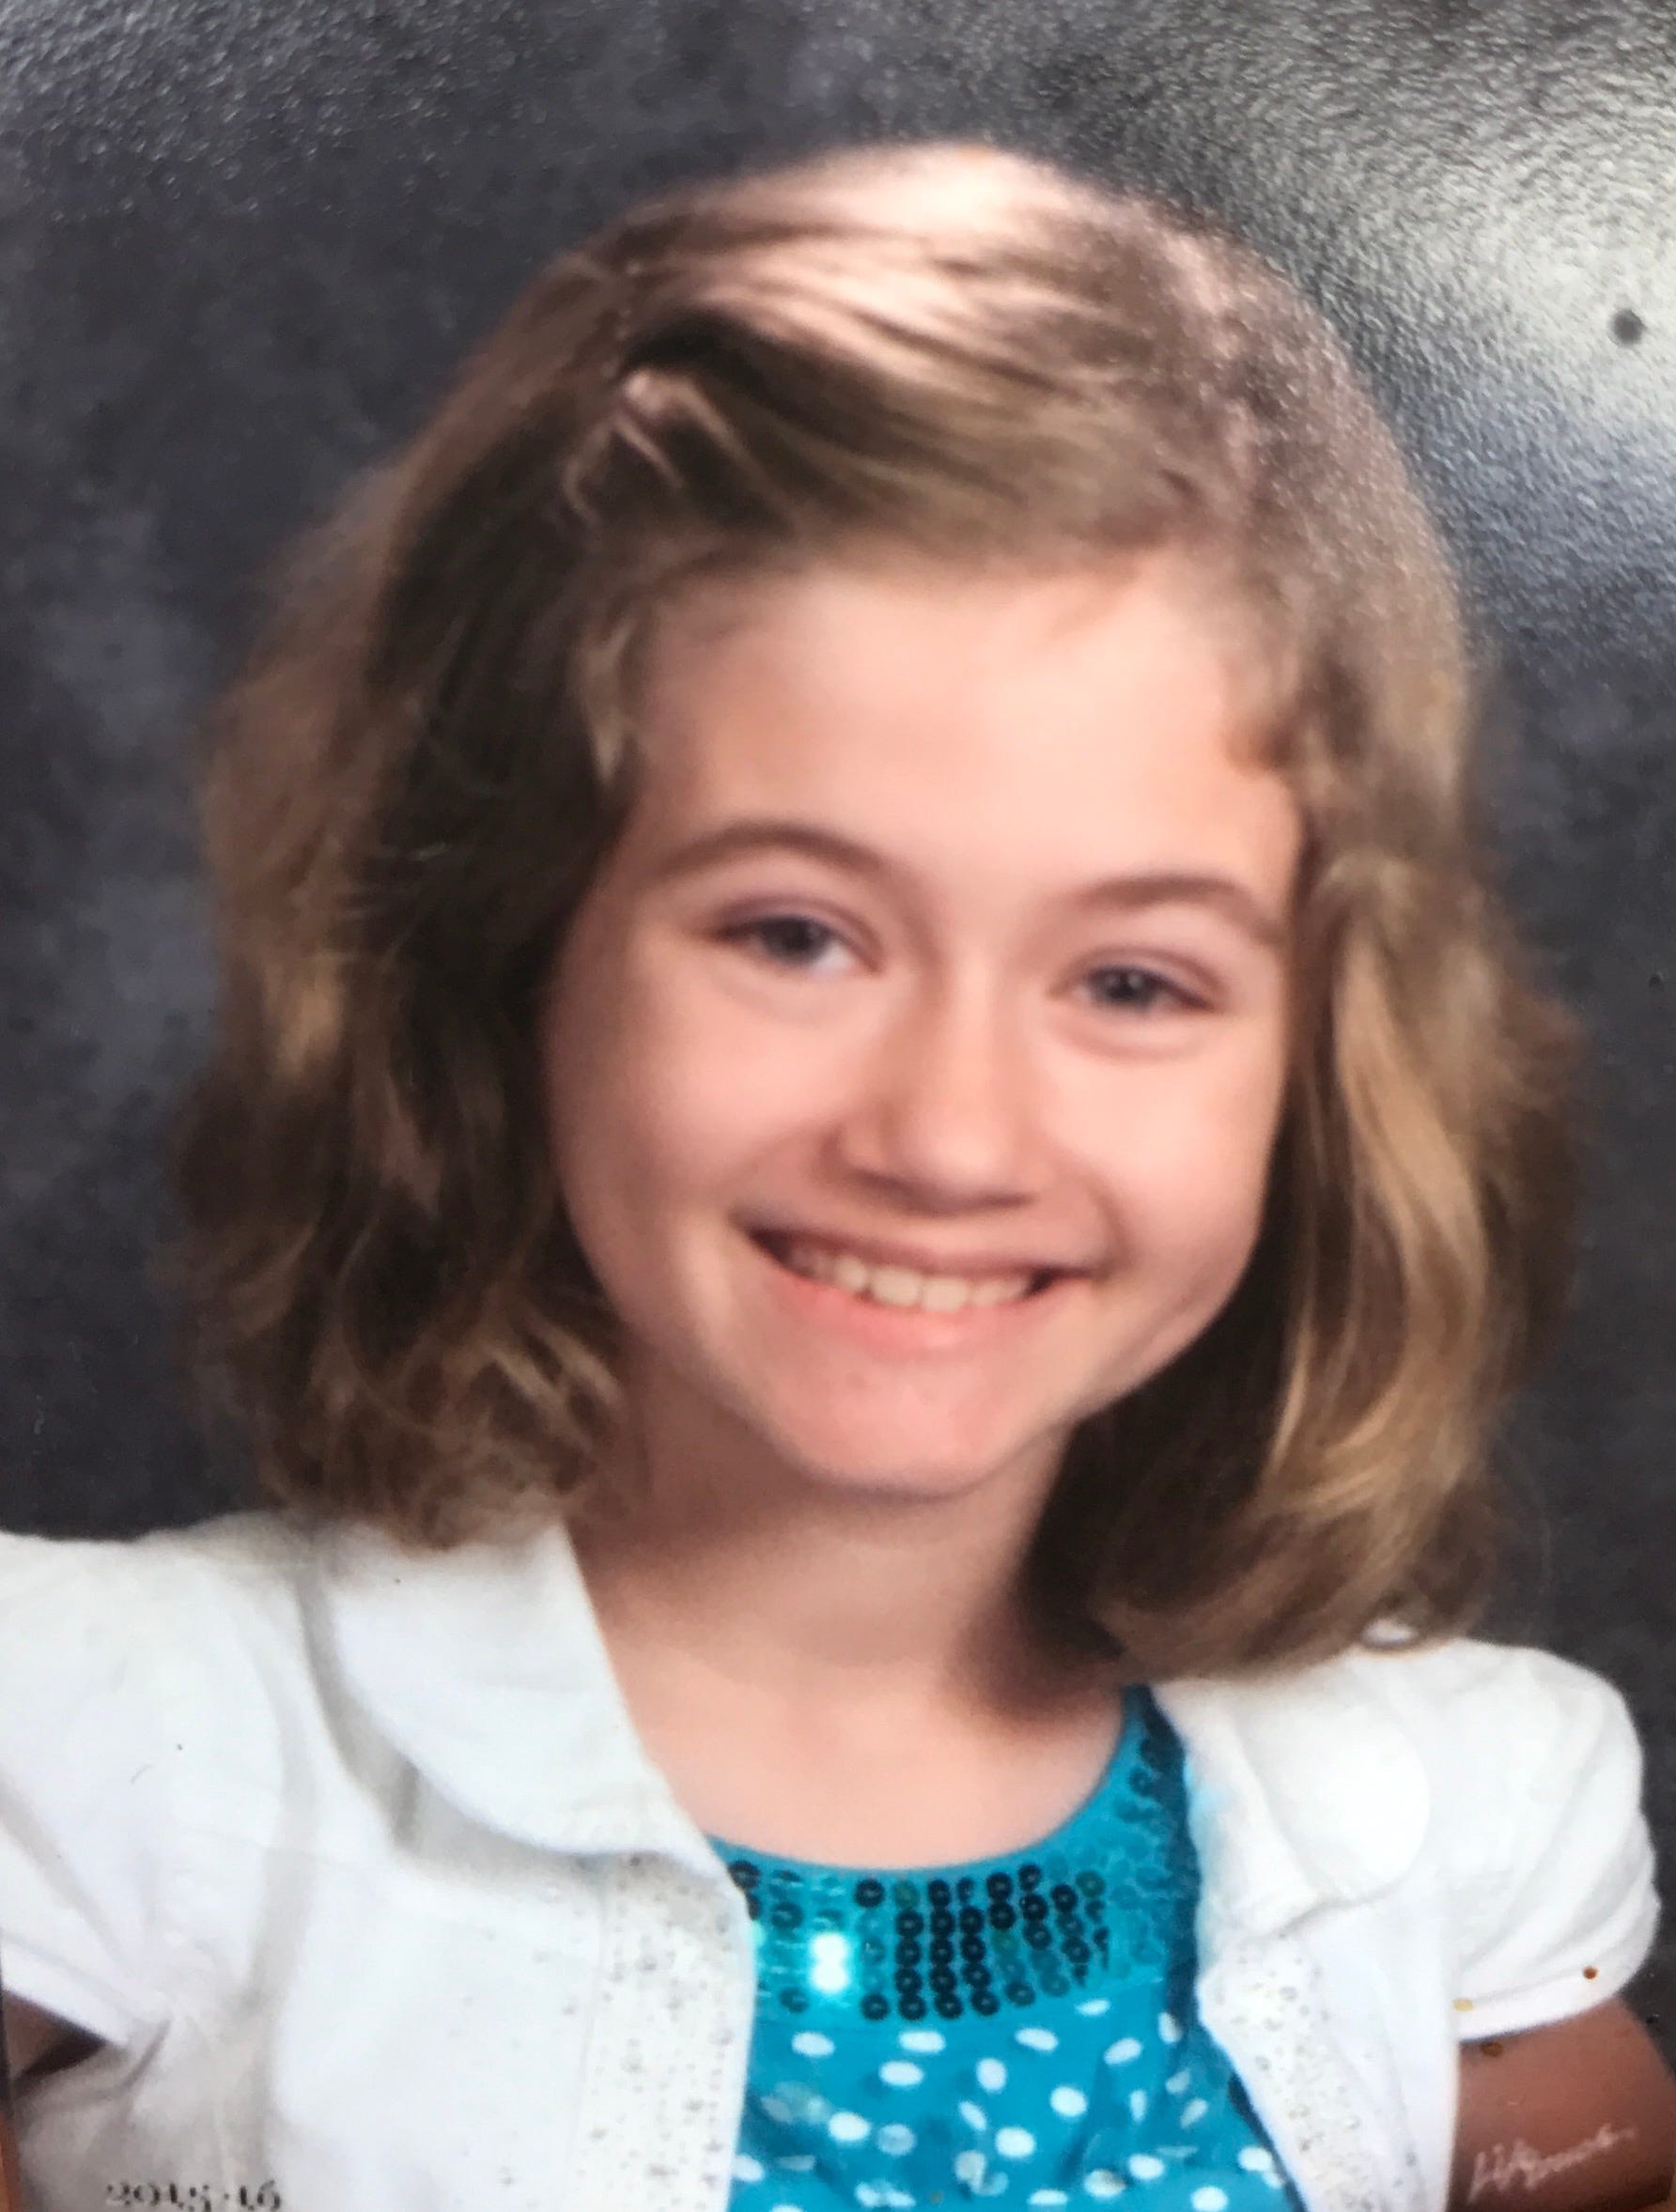 13 Year Old Girl Found Safe Greene County Sheriff Says